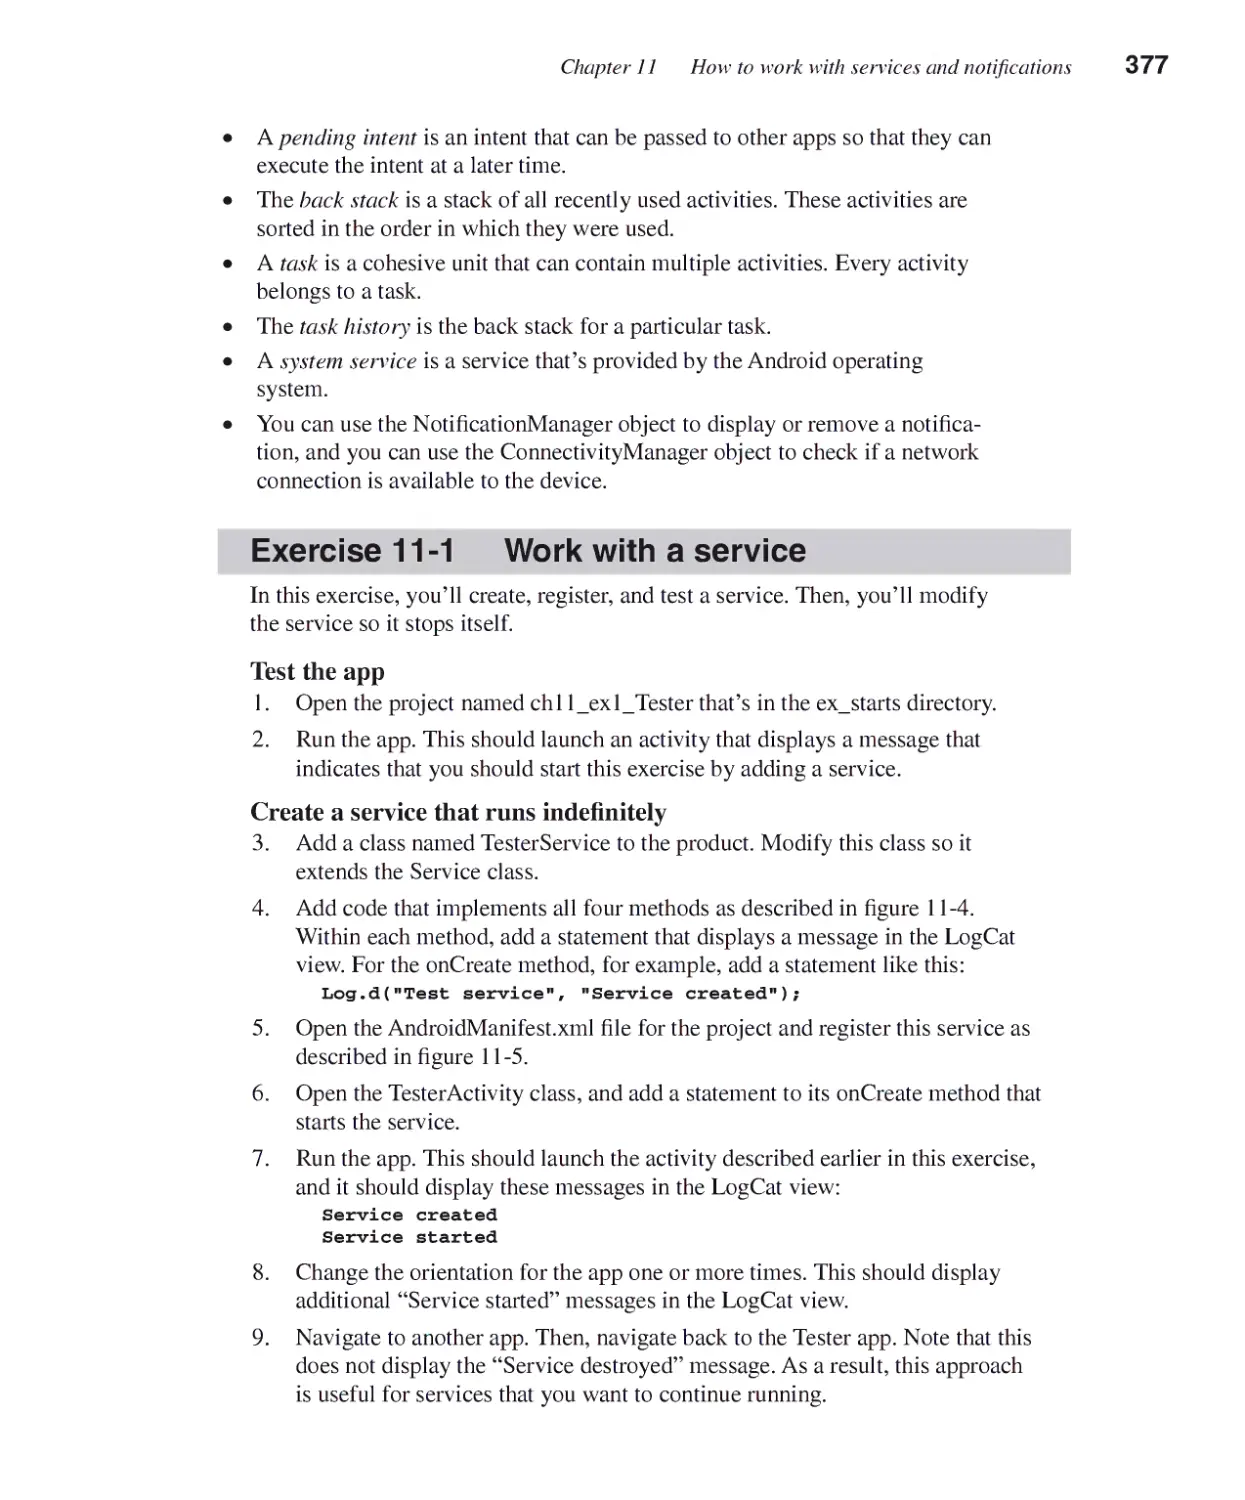 Exercise 11-1 - Work with a Service